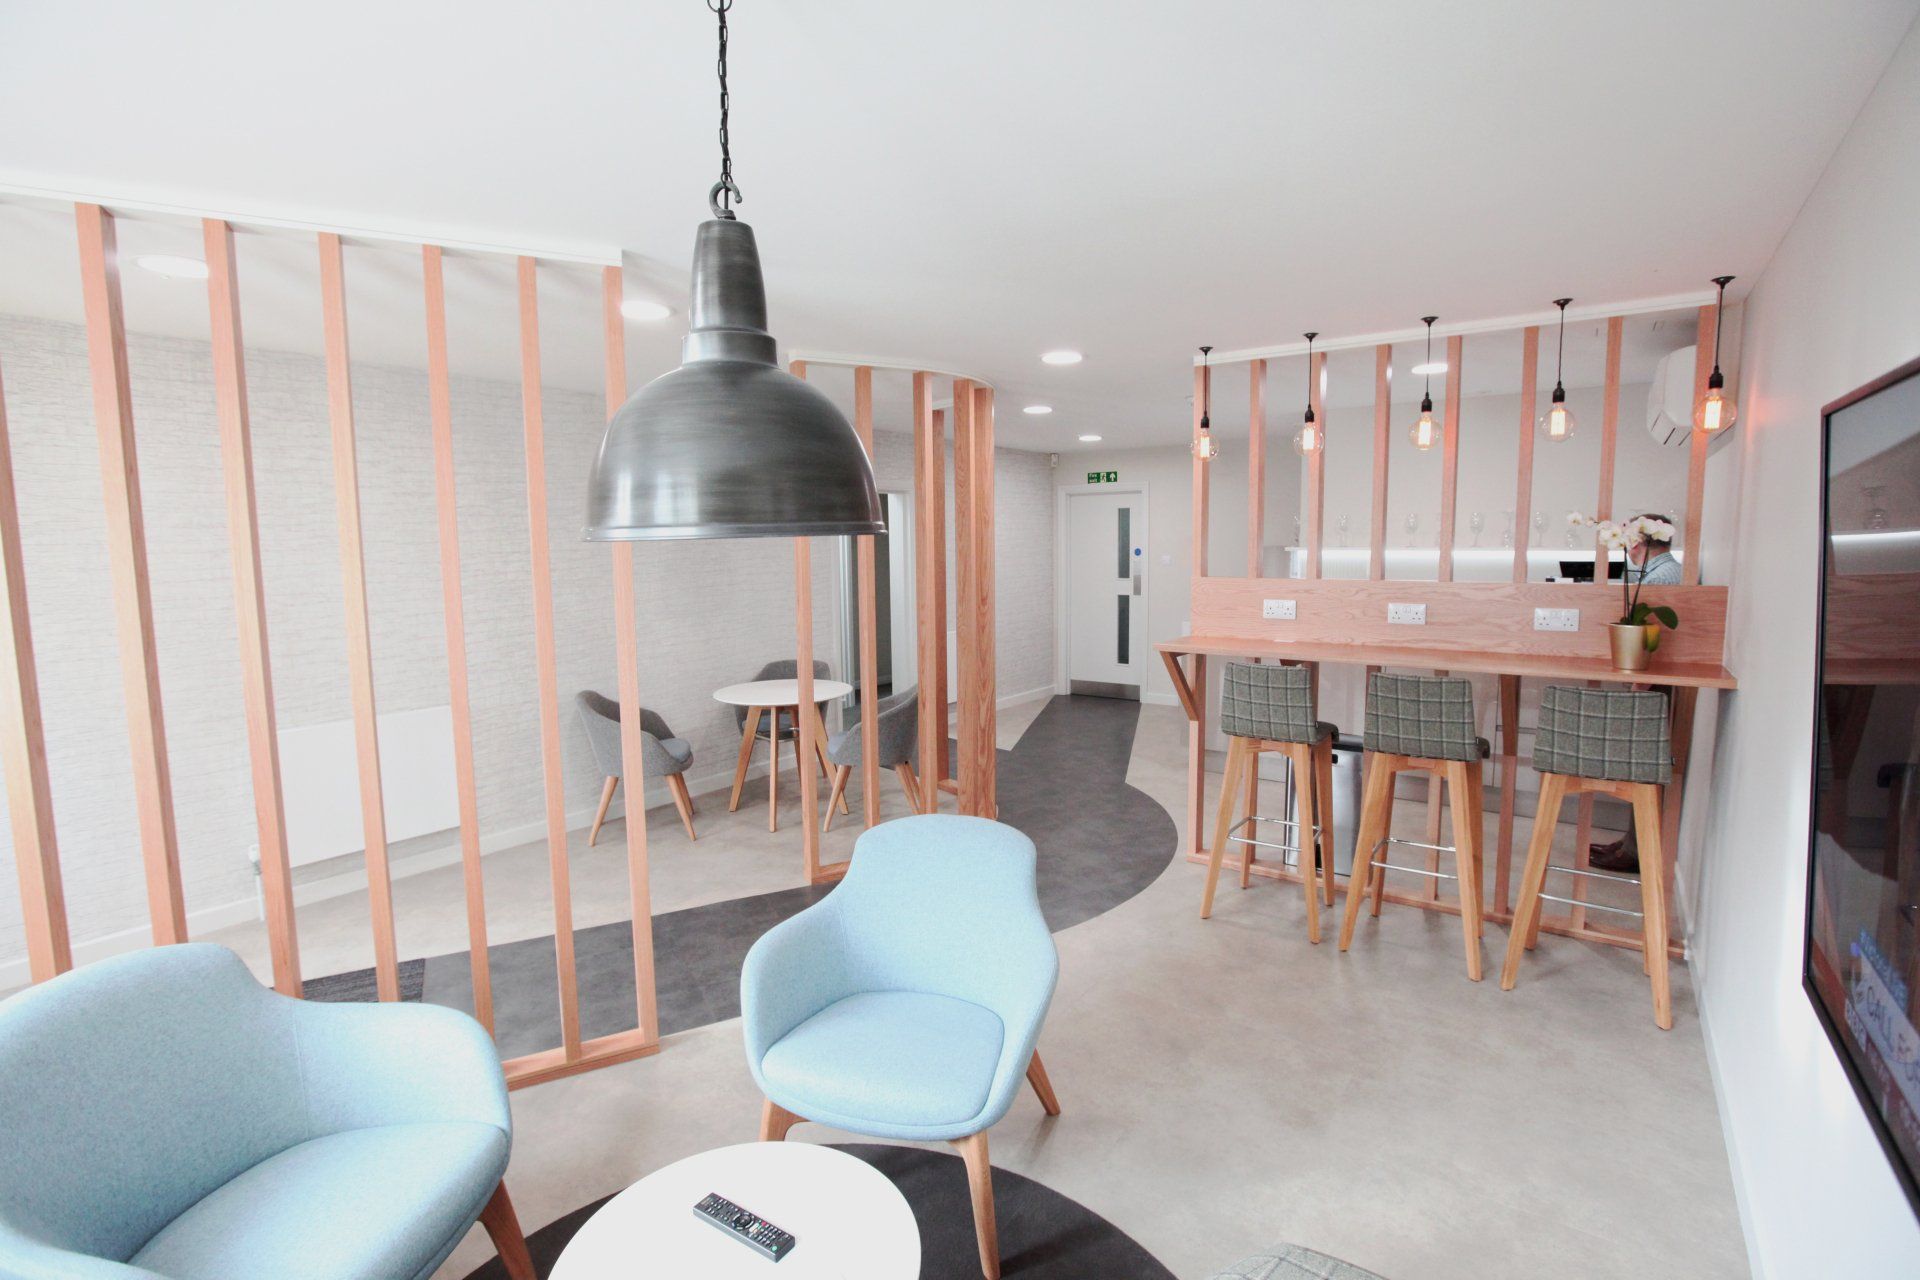 Breakout area with pastel pink wood and pastel blue chairs by Glenside